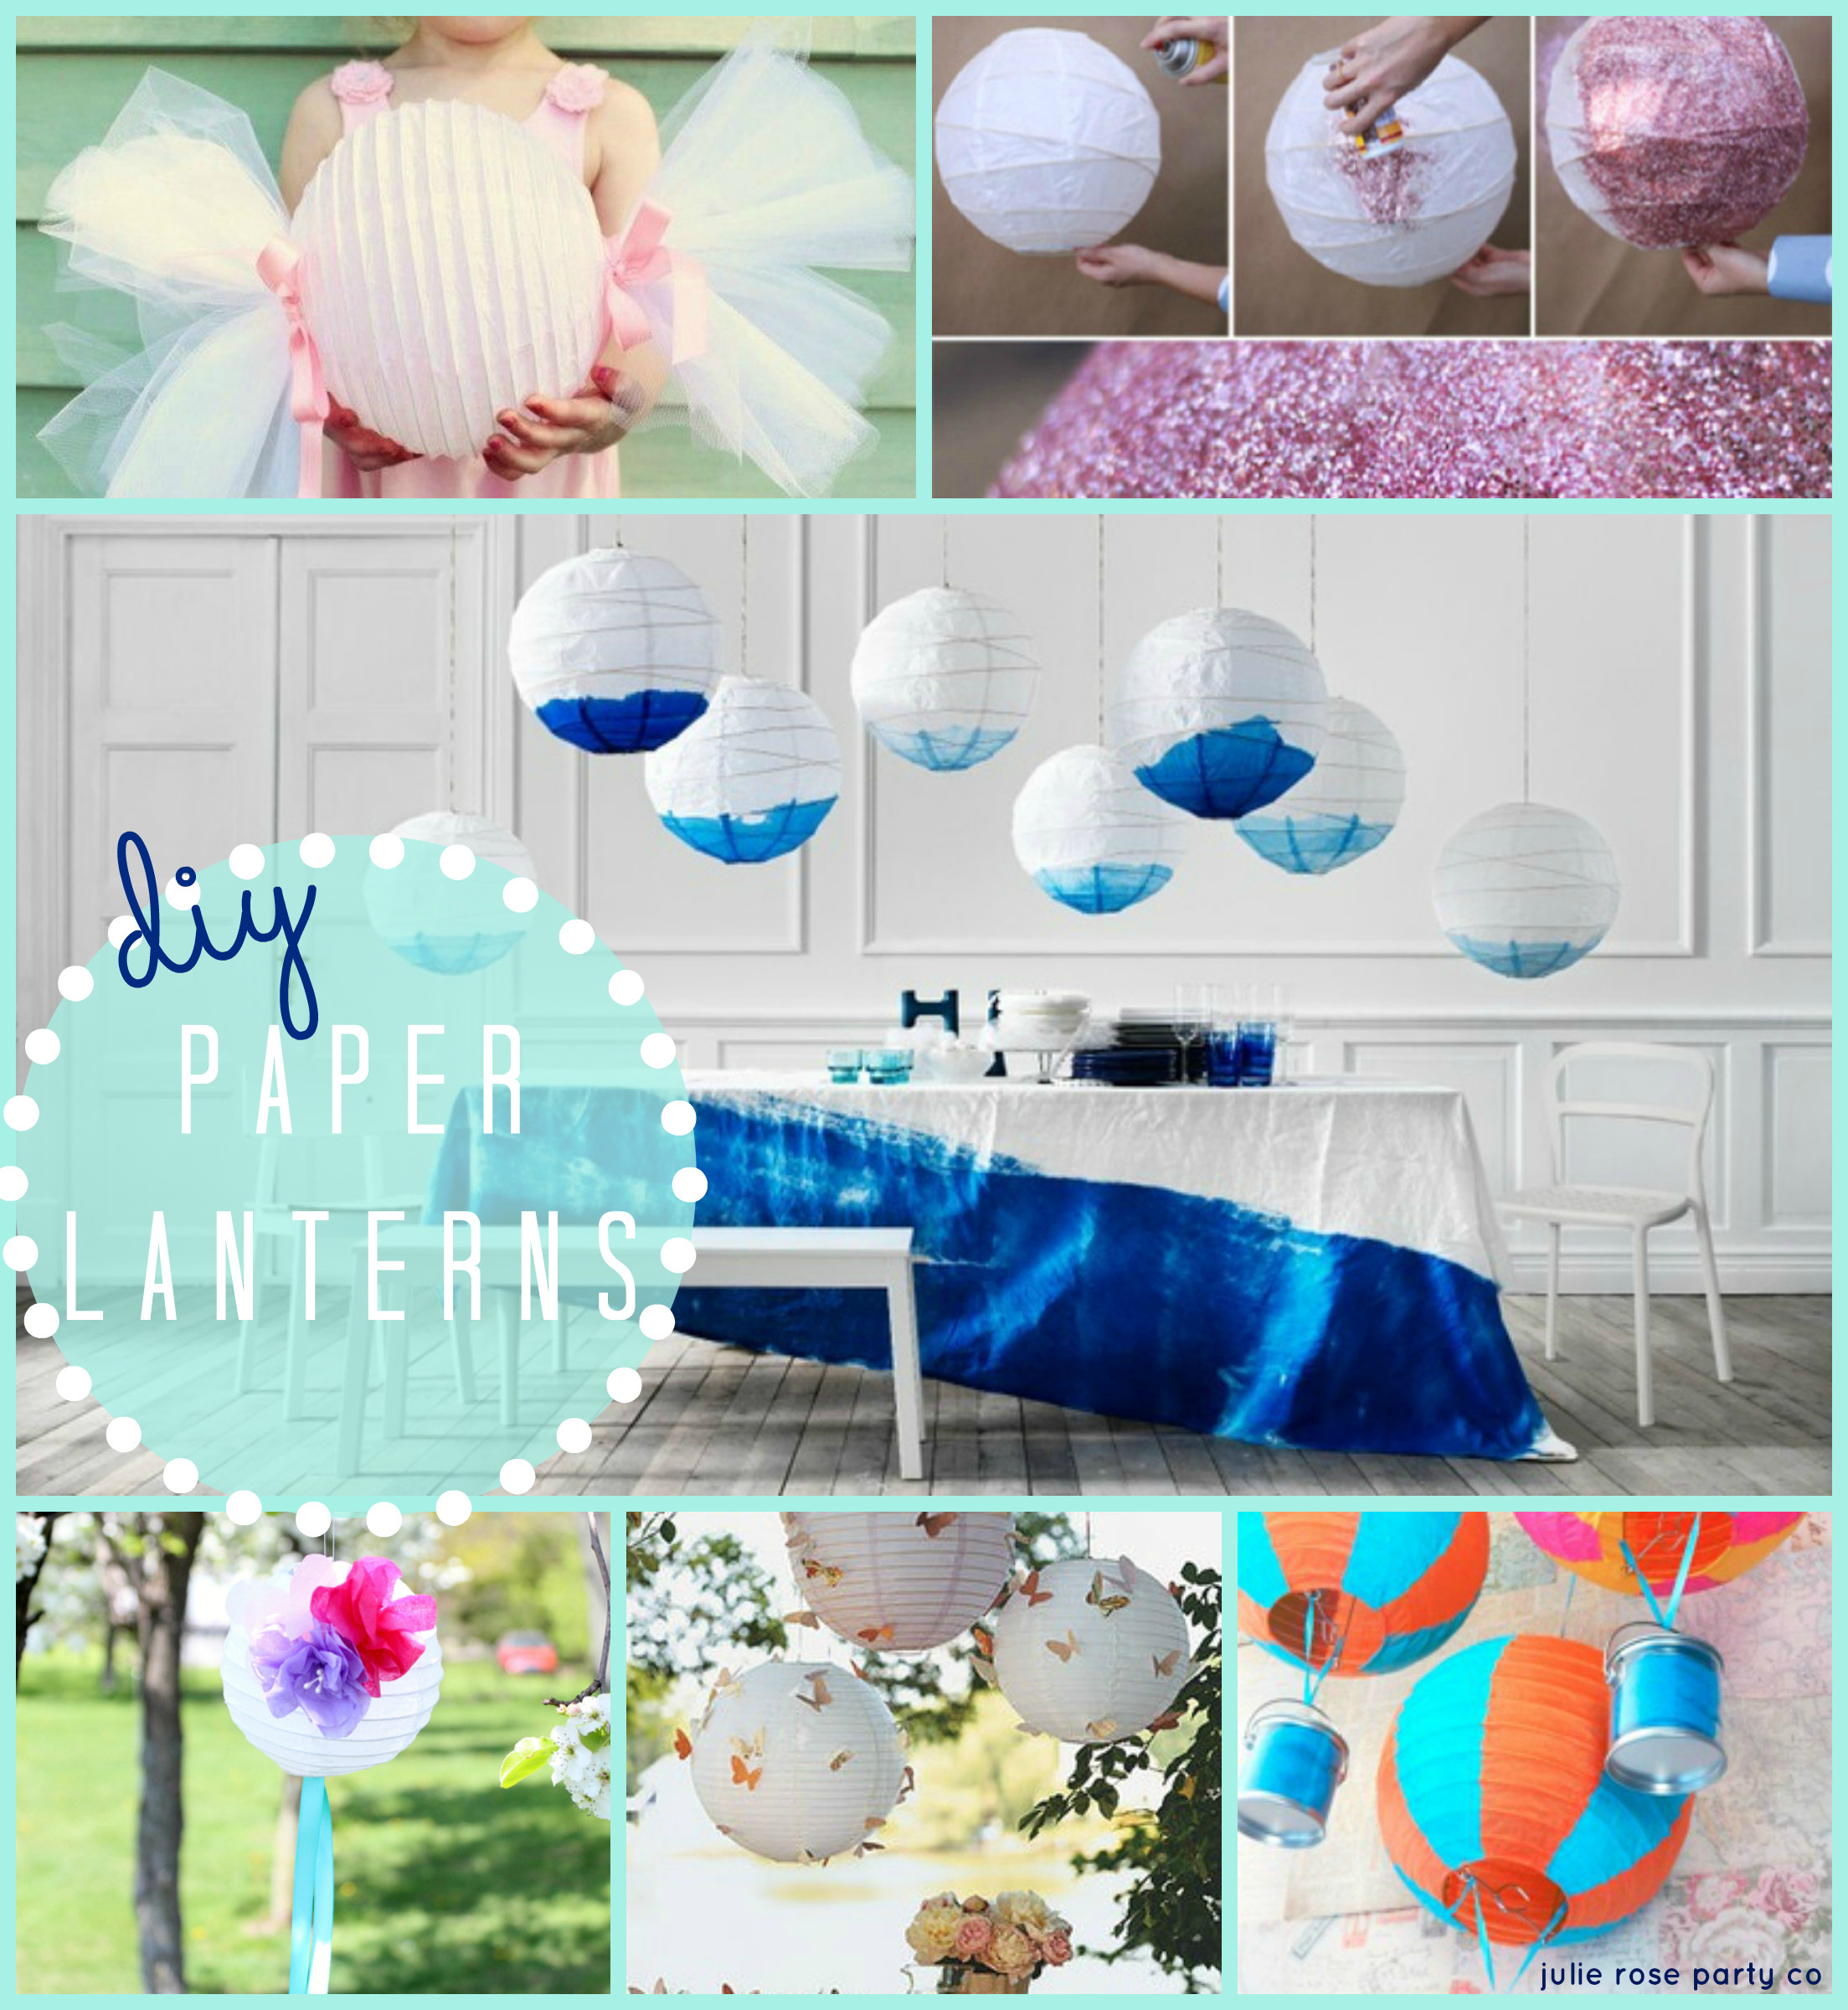 DIY Paper Party Decorations
 Six great ways to decorate with paper lanterns